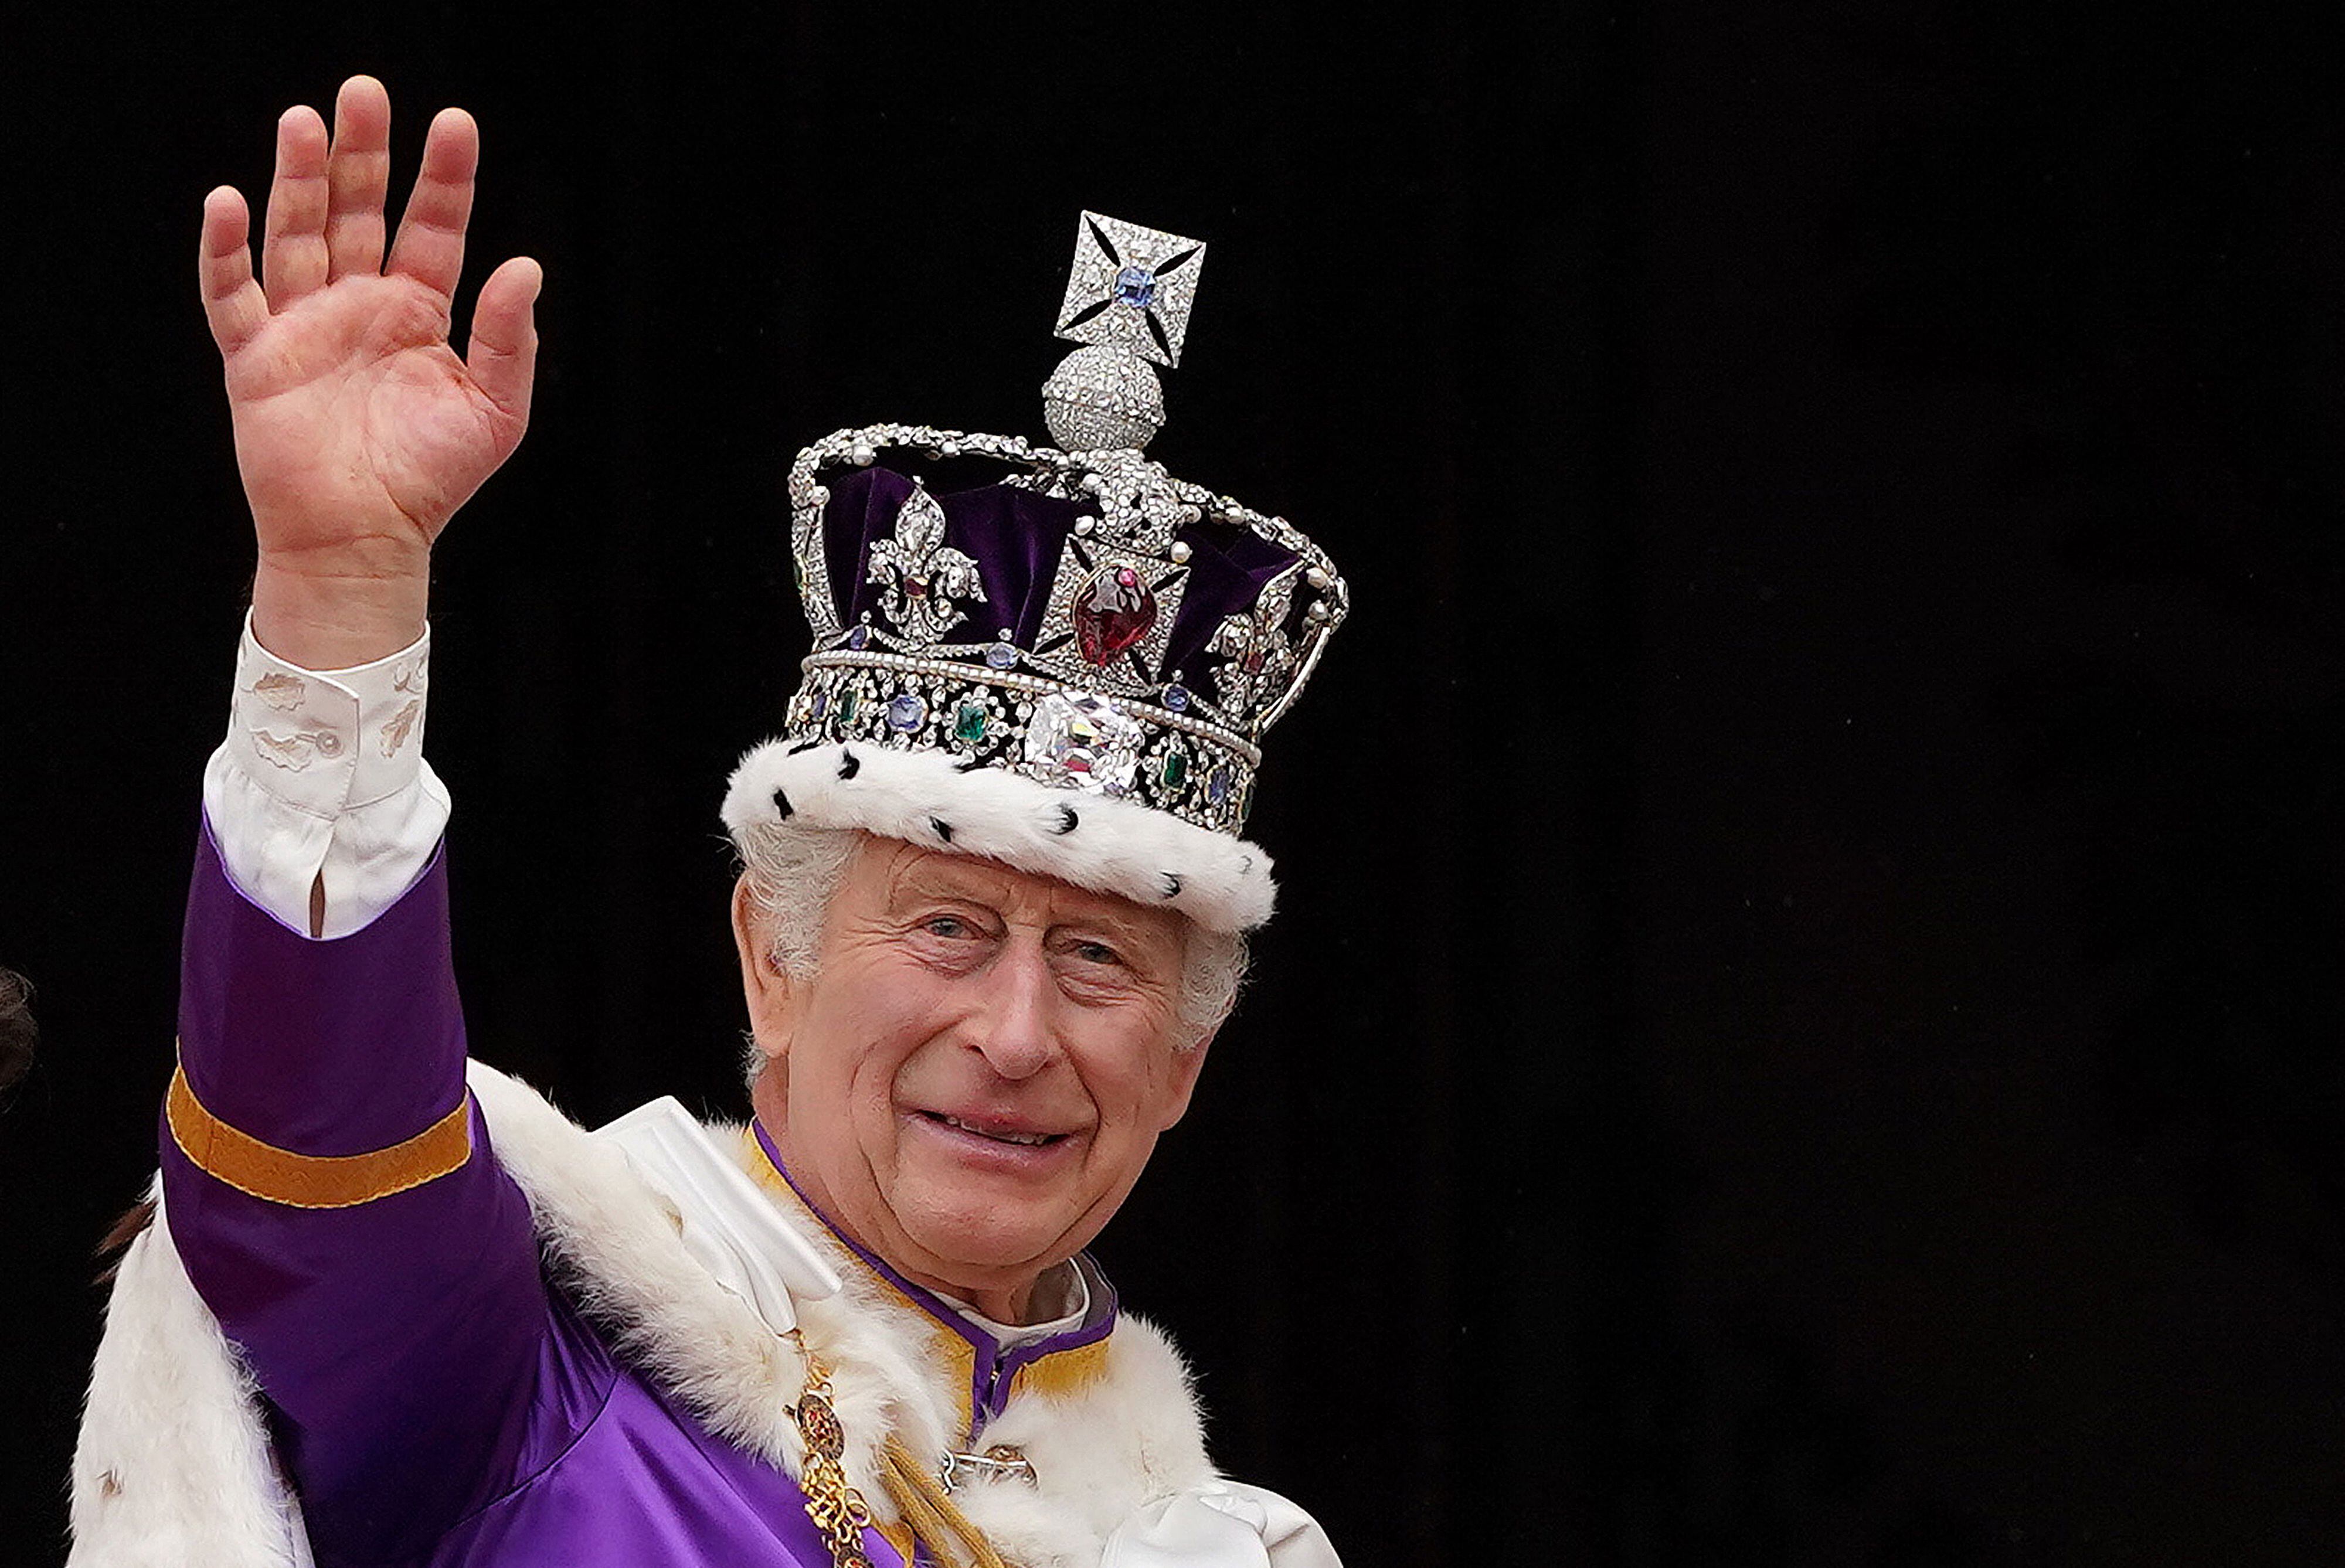 King Charles III preferred to make his illness public so as not to generate speculation about his absence (Photo: AFP)